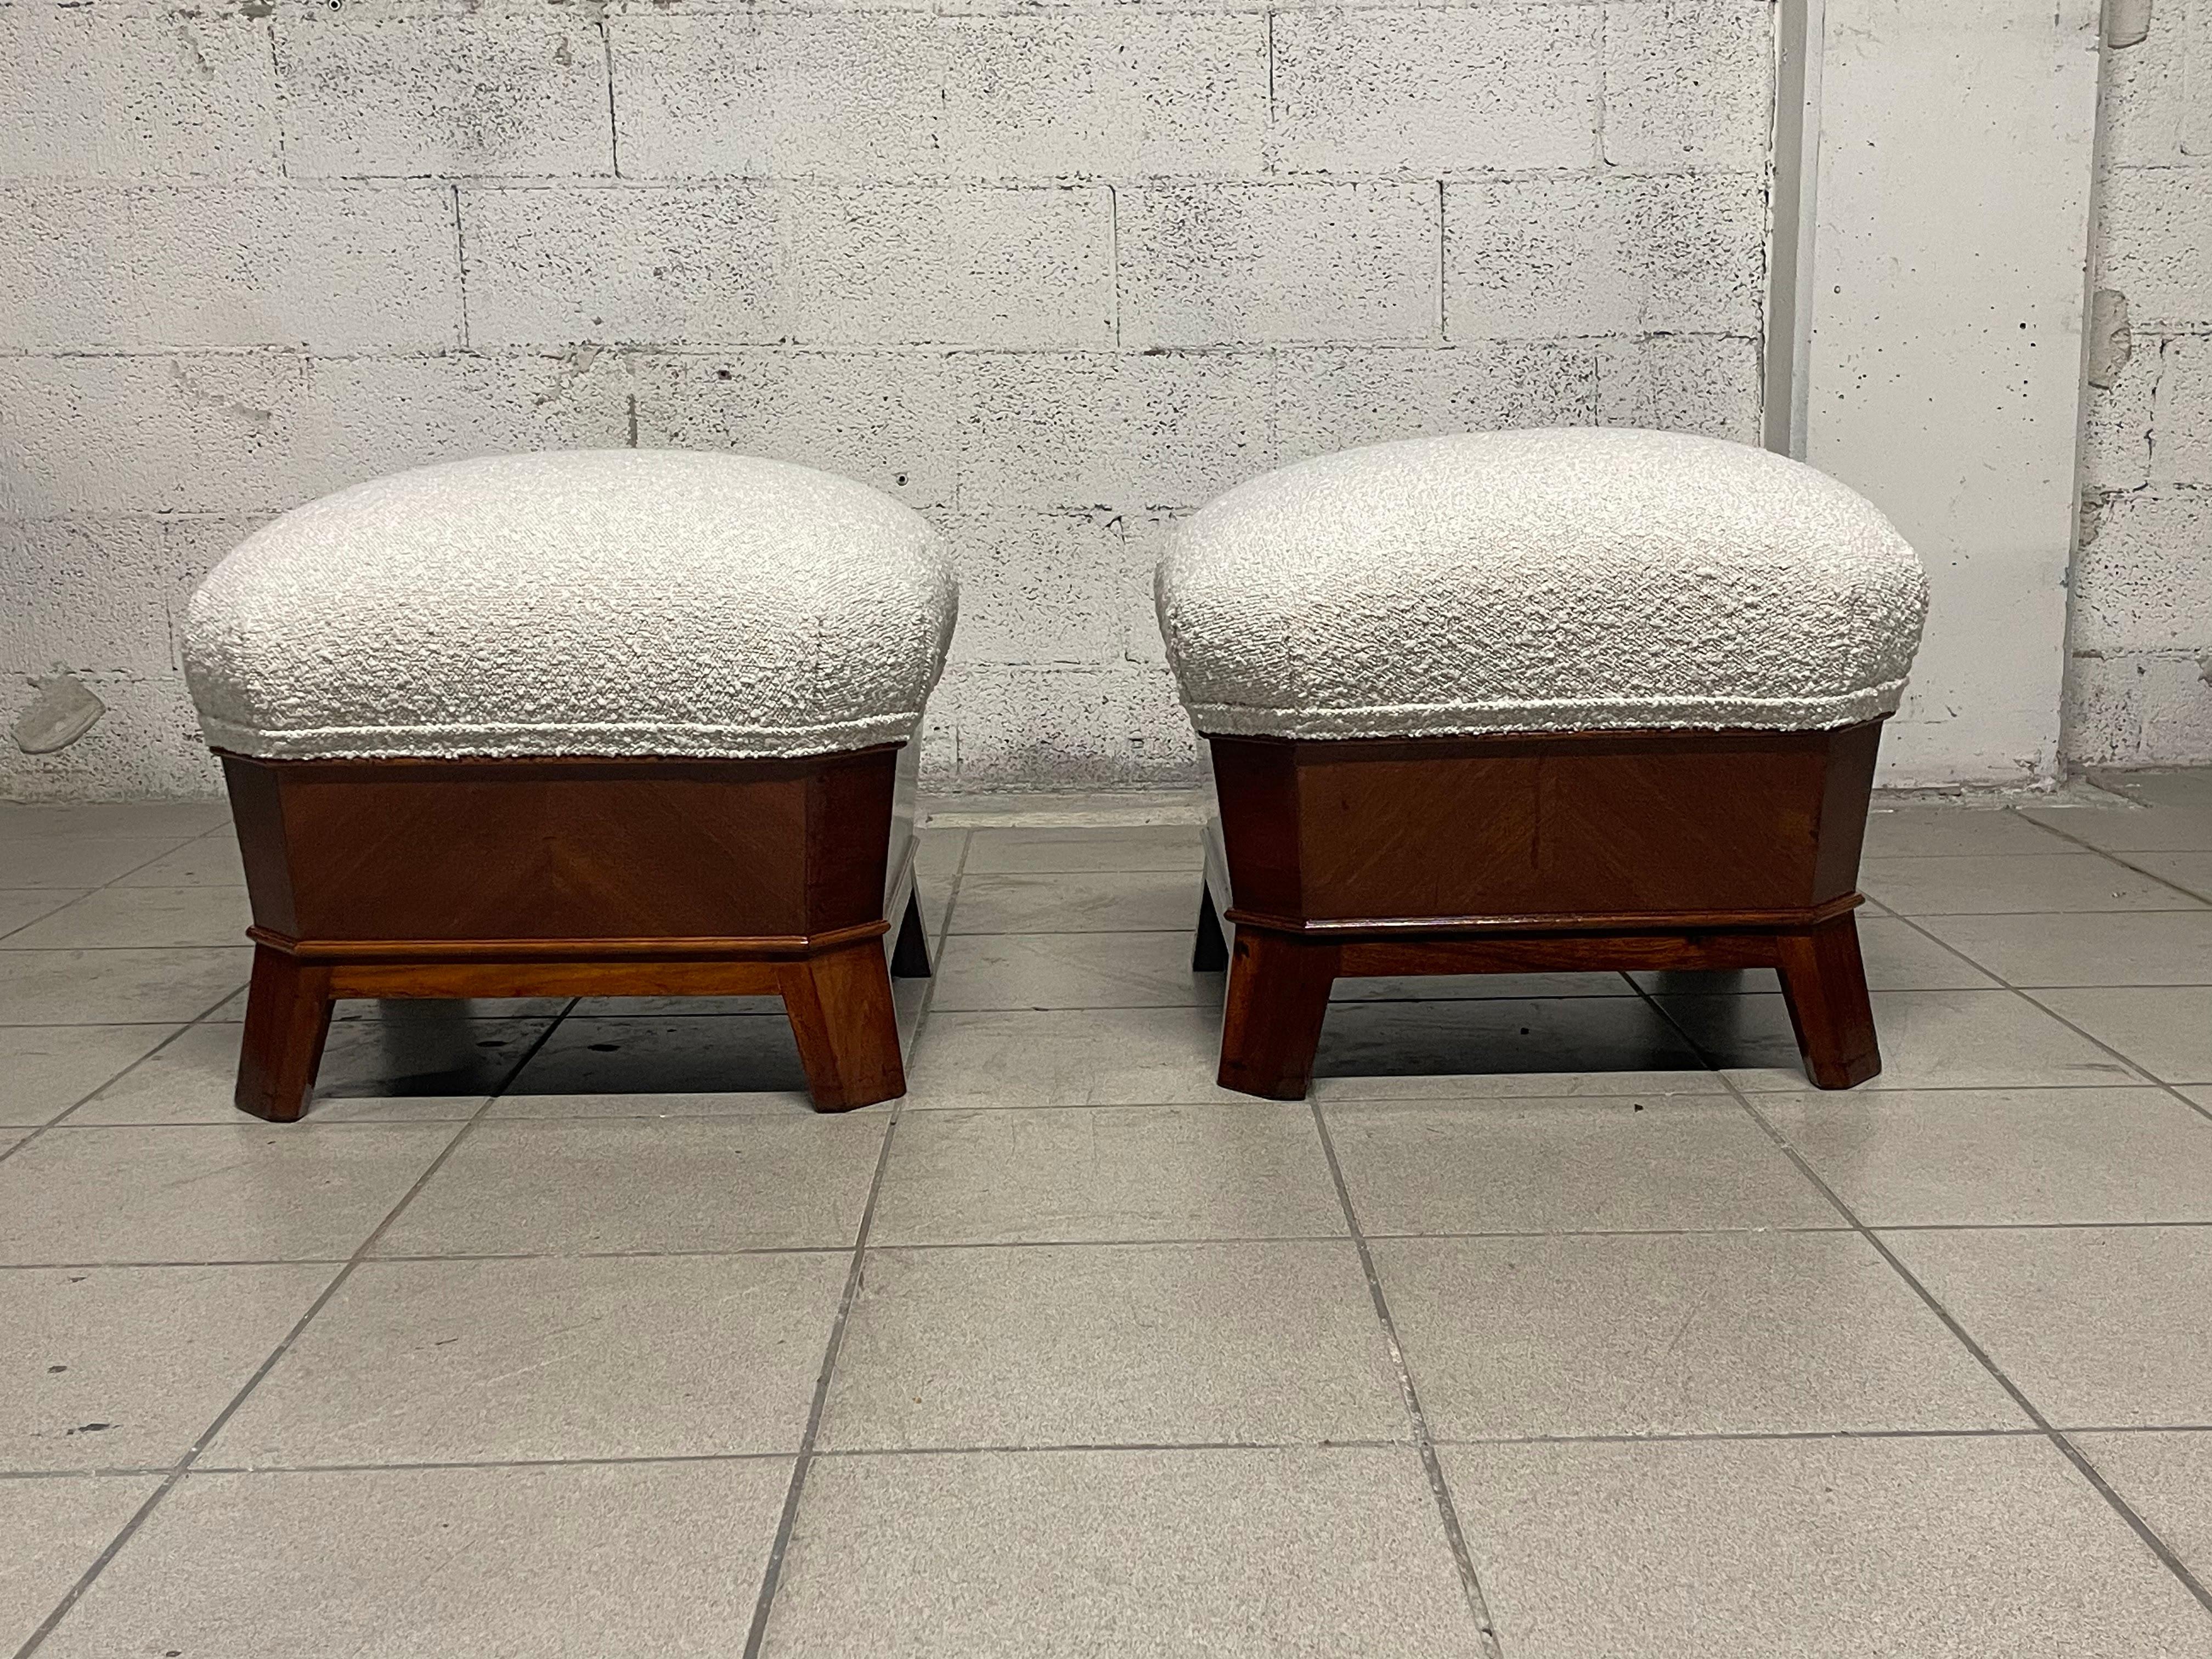 Pair of large 1930s poufs made of mahogany wood.

The pair was completely restored in the wooden parts, and the upholstery was renewed with a natural white bouclé fabric.